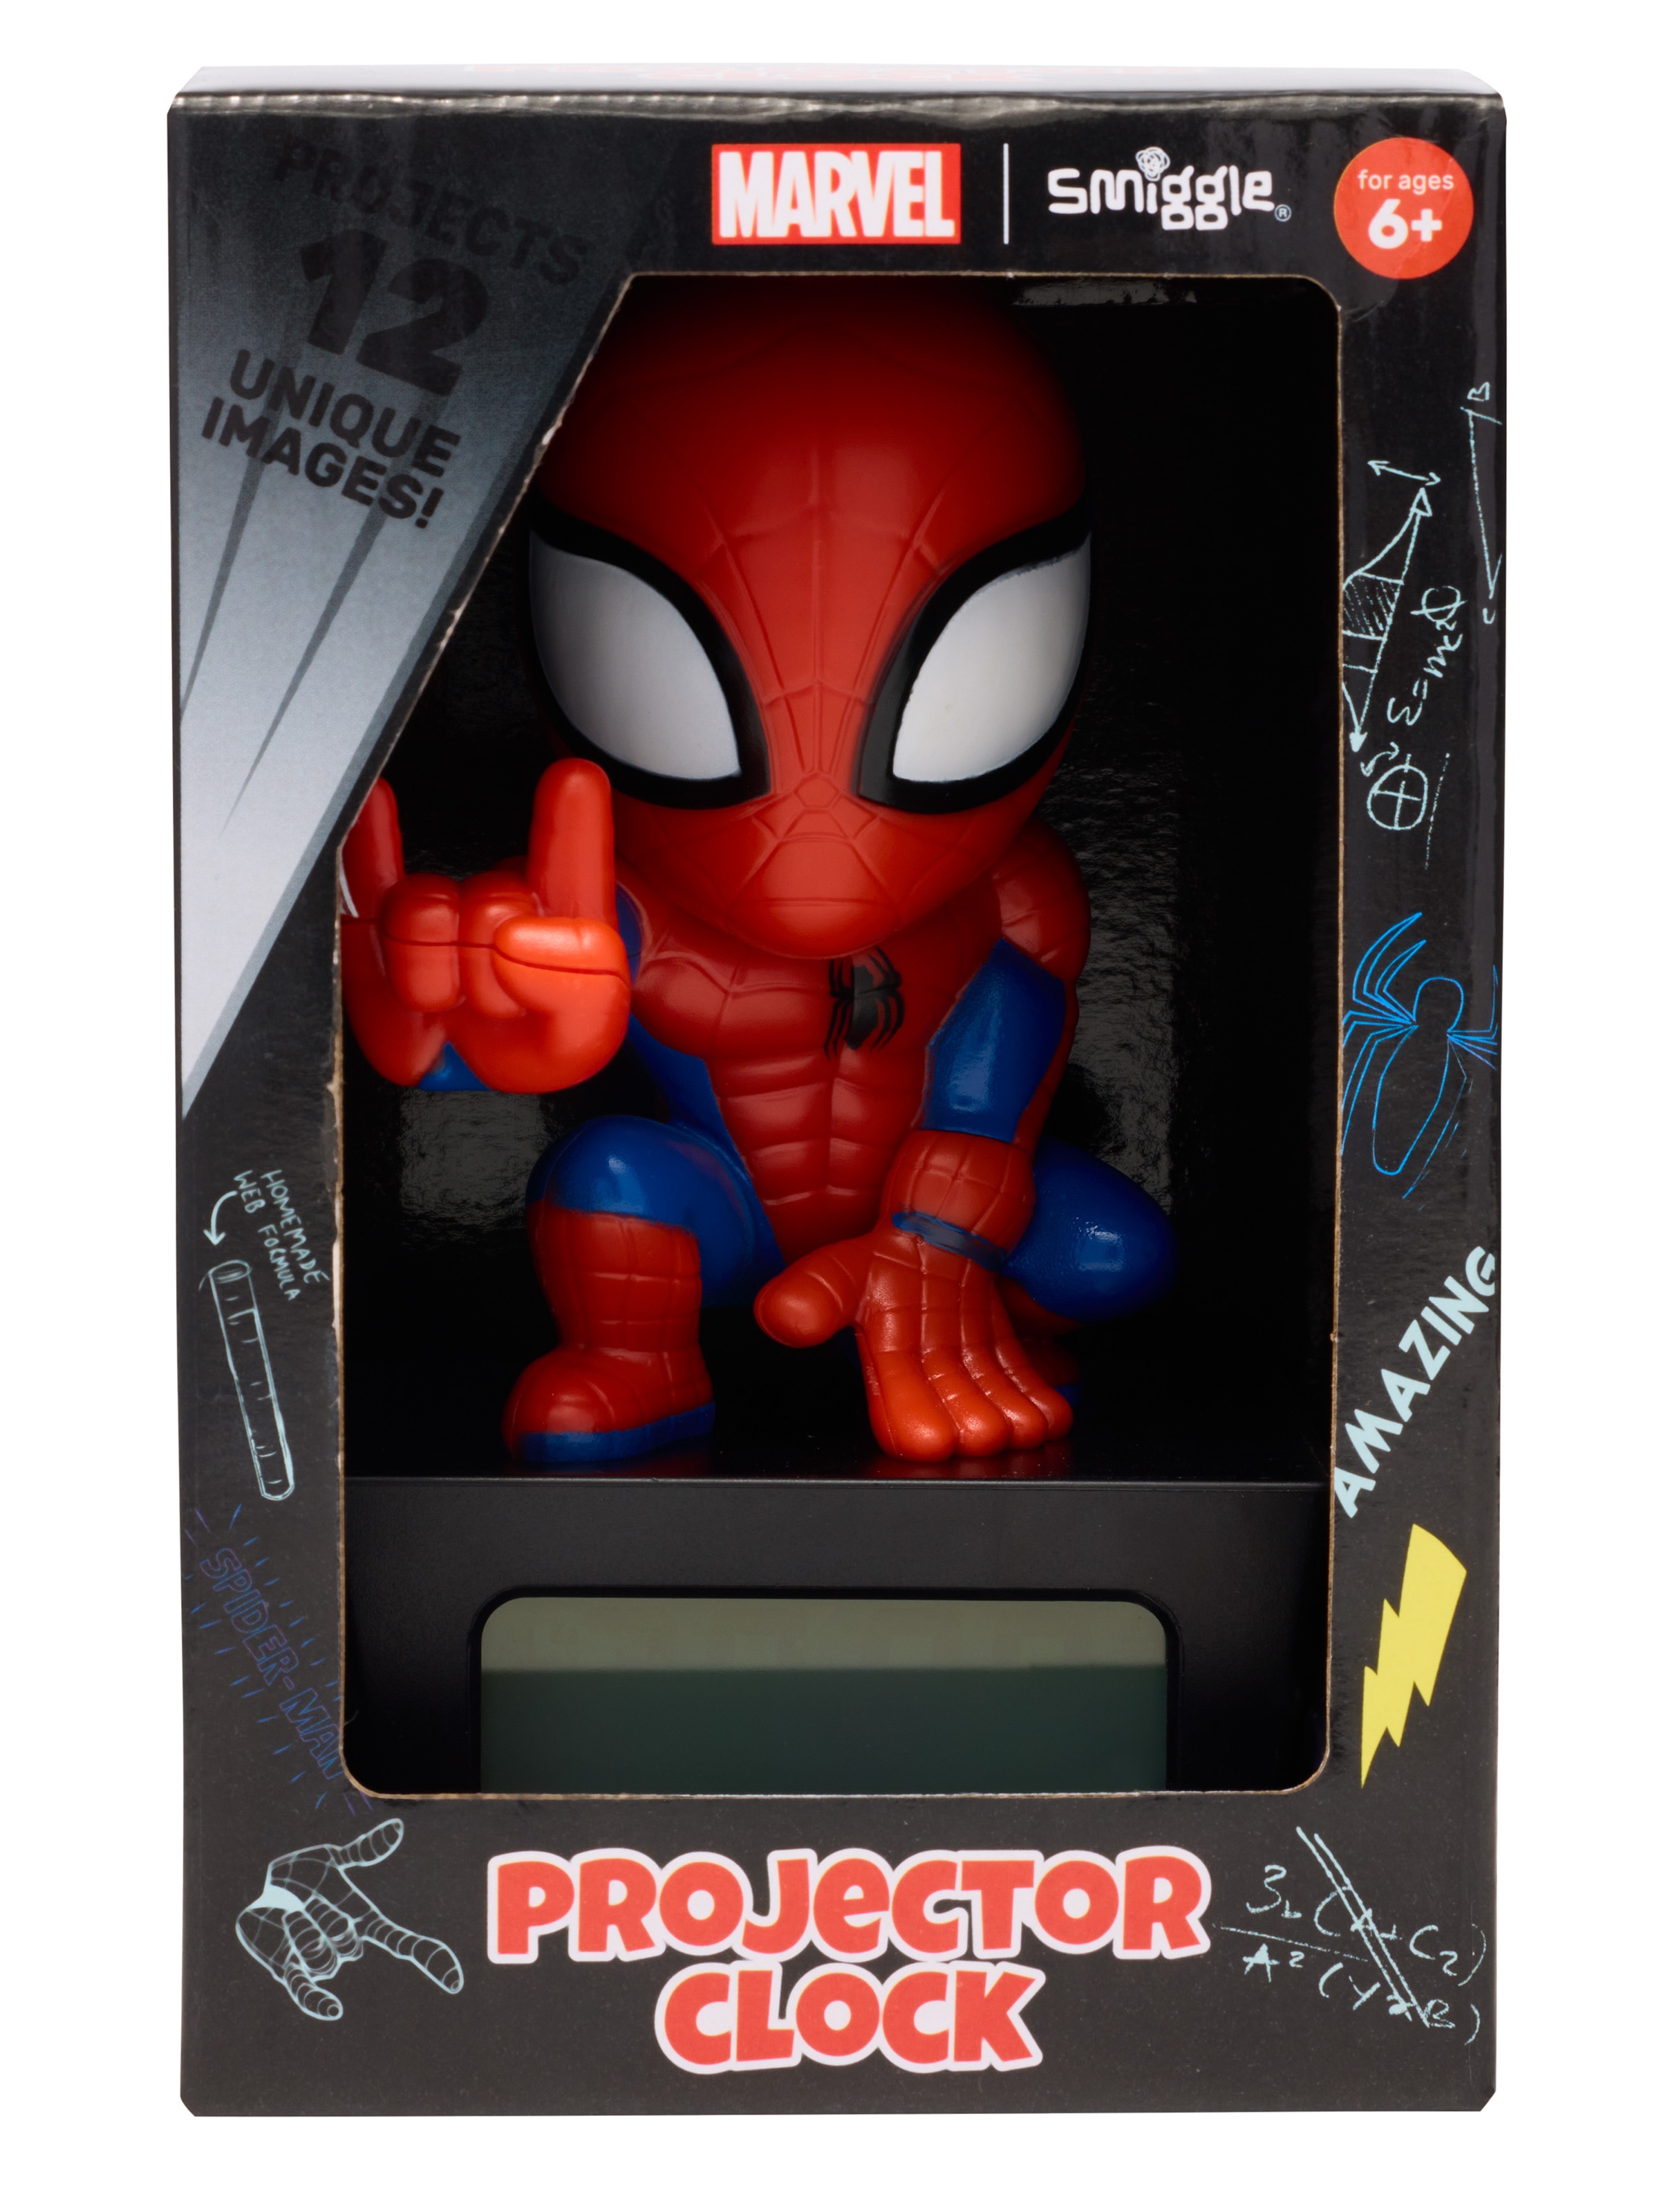  Projector Alarm Clock Spiderman Marvel with Snooze Function and  Alarm Function, Night Light with Timer, LCD Screen, Battery Operated,  Blue/Red, RL977SP : Home & Kitchen